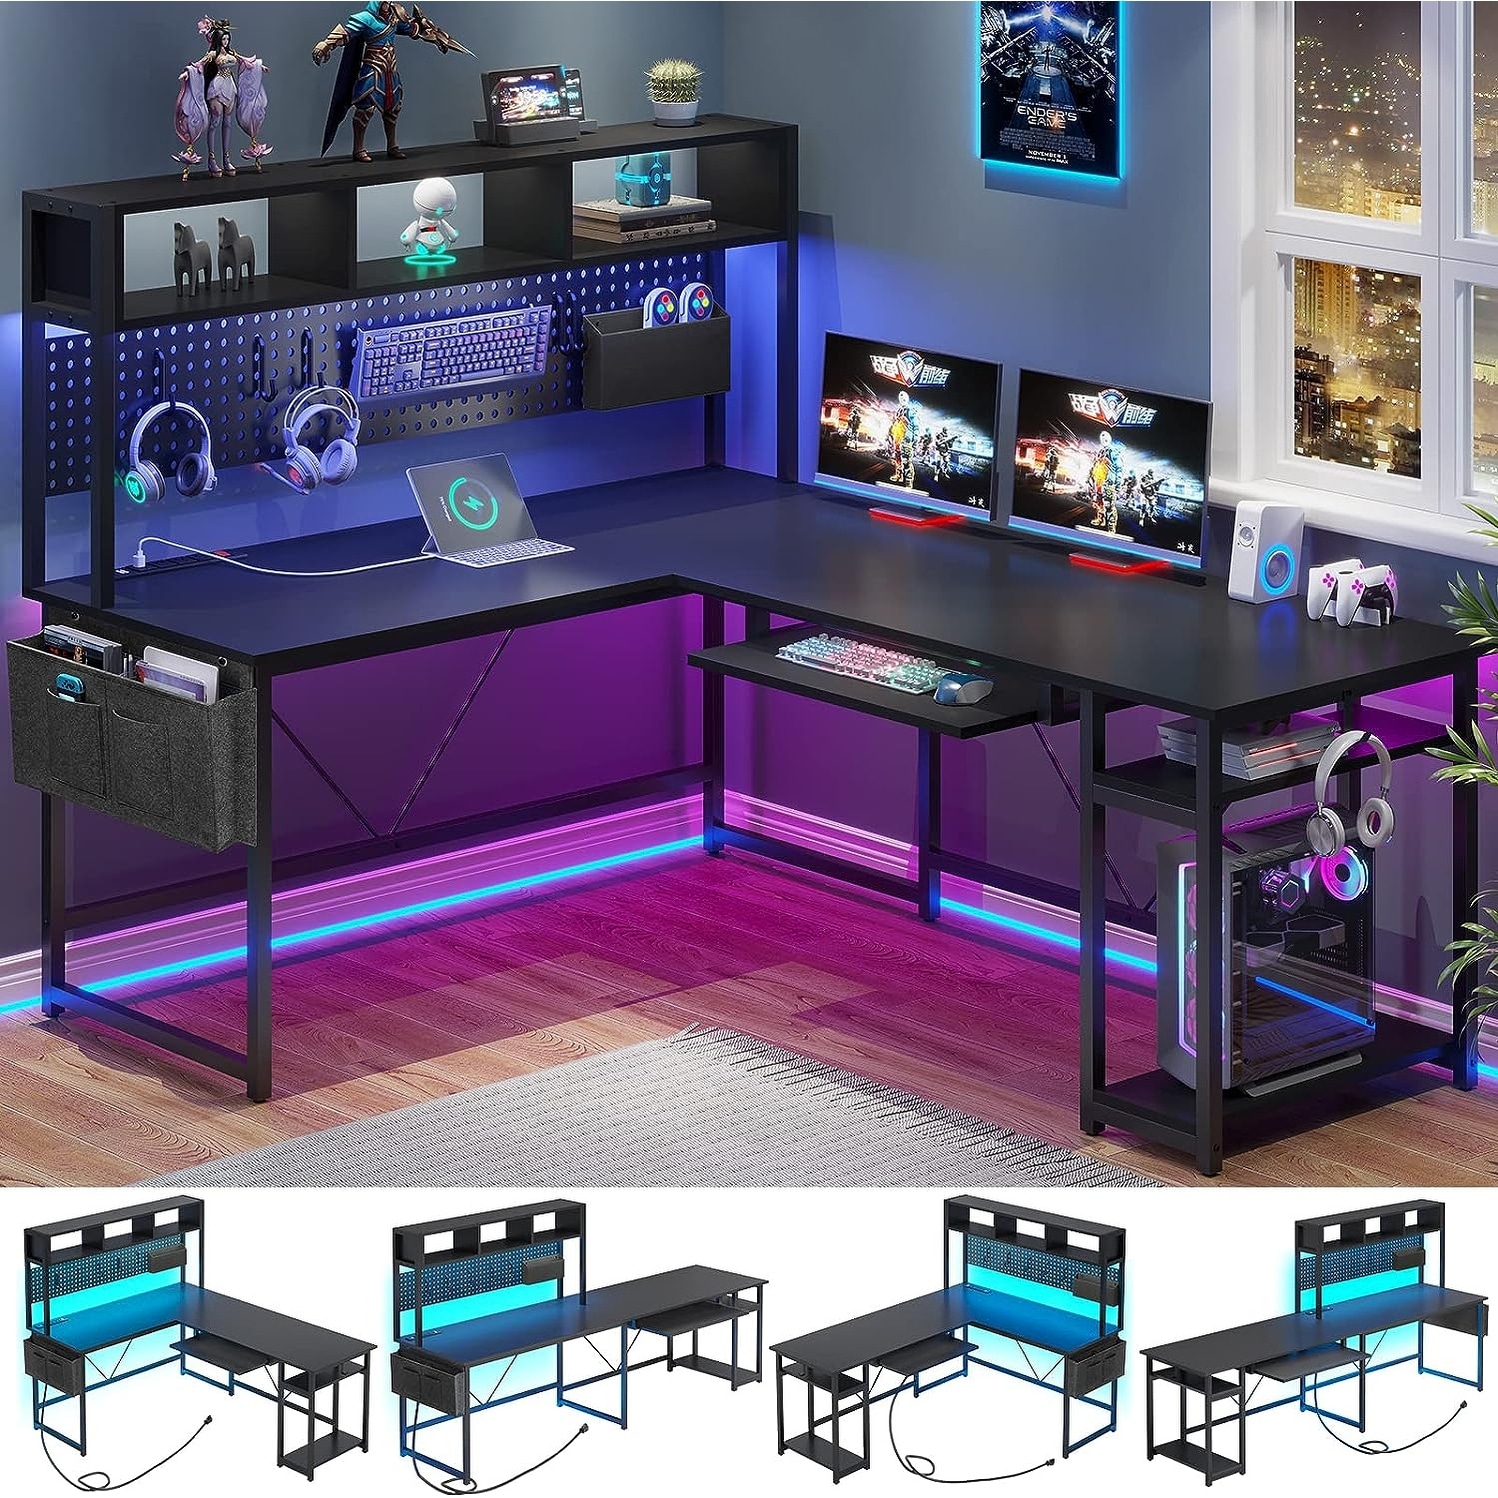 https://ak1.ostkcdn.com/images/products/is/images/direct/7e06bb261923b3732ed1474c9f8893189163cb20/L-Shaped-Gaming-Desk-Reversible-Computer-Desk-Power-Outlet-Pegboard.jpg